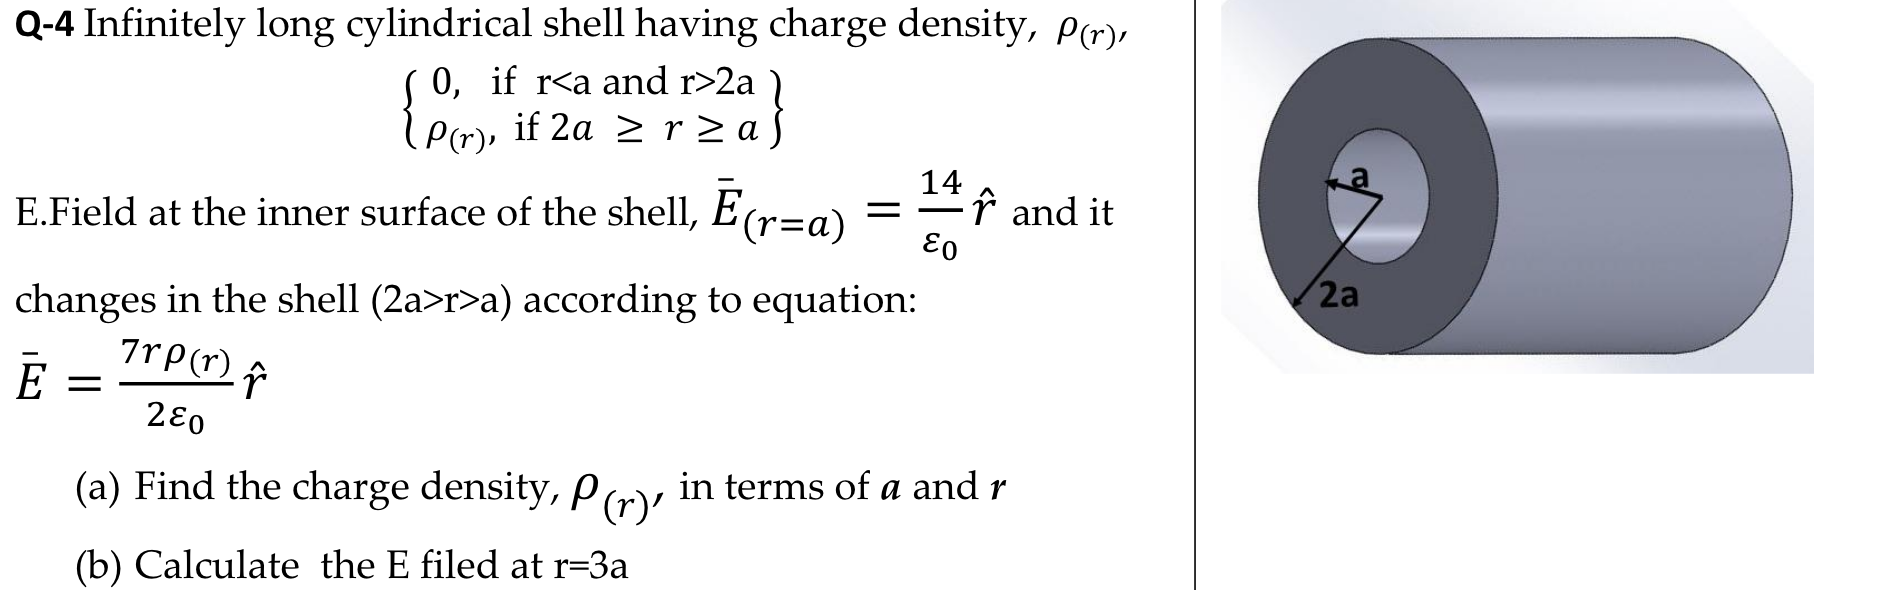 Q-4 Infinitely long cylindrical shell having charge density, P(r),
0, if r<a and r>2a
P(r), if 2a > r 2 a}
E.Field at the inner surface of the shell, E(r=a)
14
î and it
